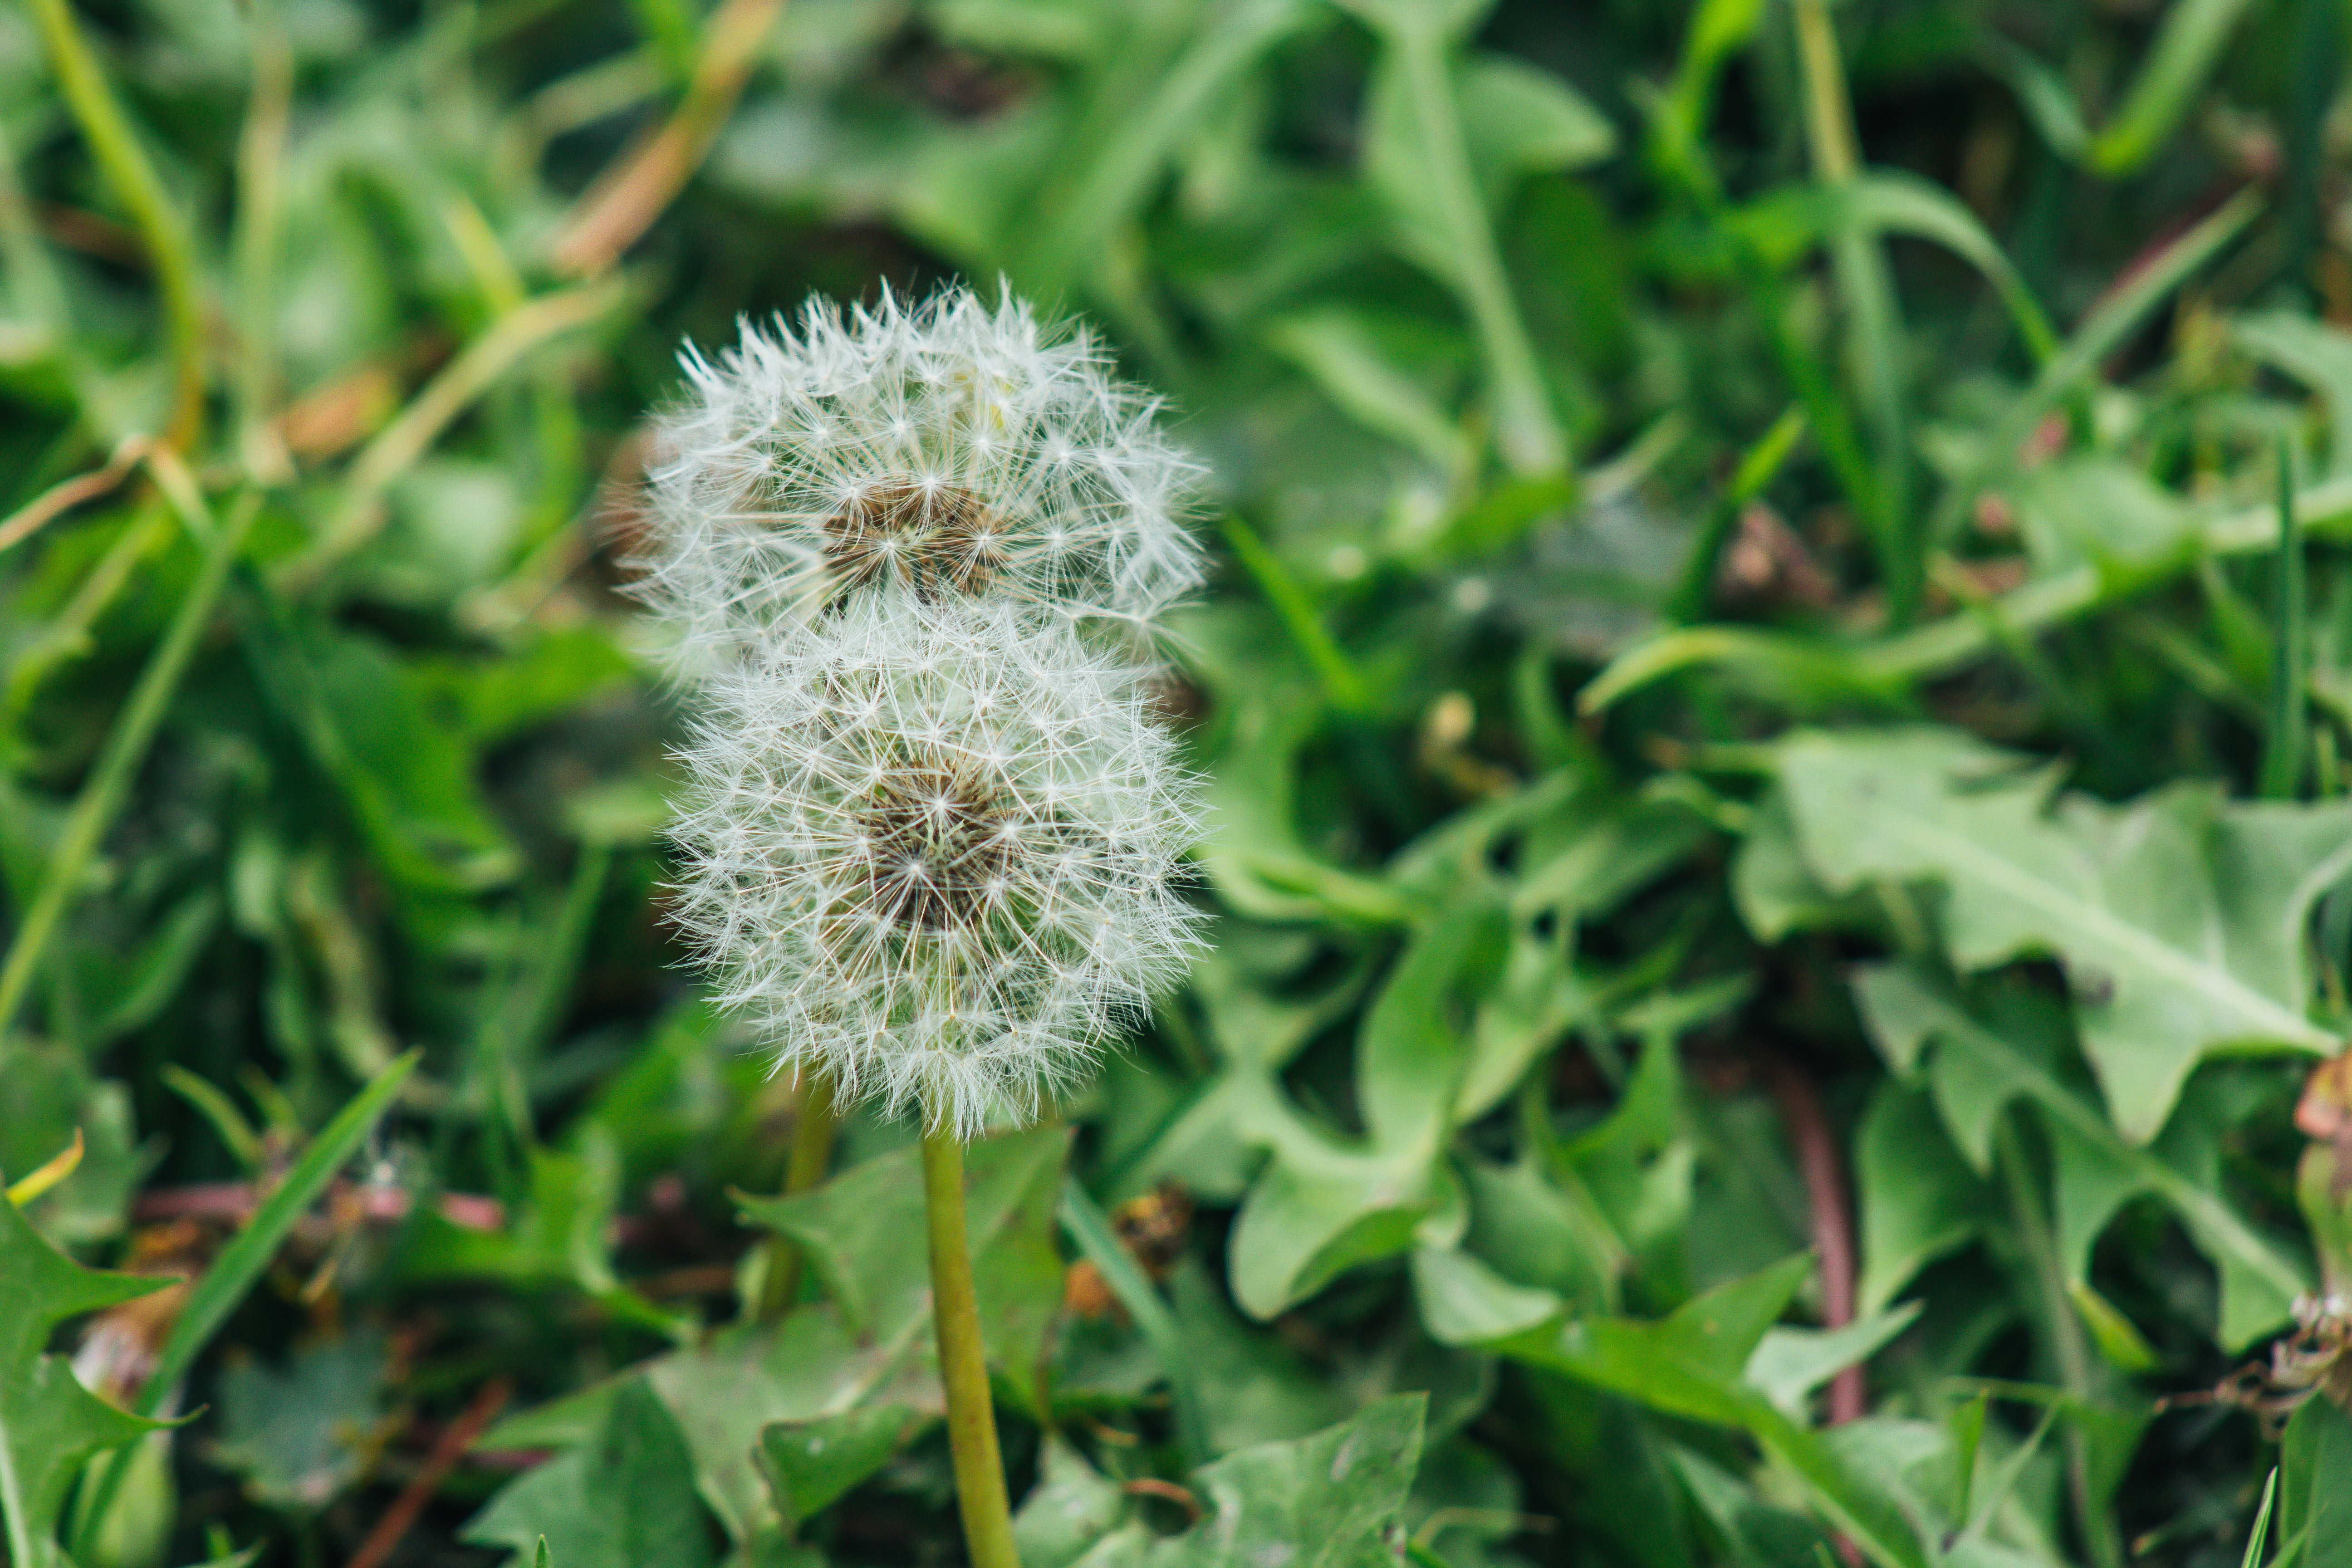 Close Up Photo of White Dandelion, Backgrounds, Flowers, Plants, Outdoors, HQ Photo